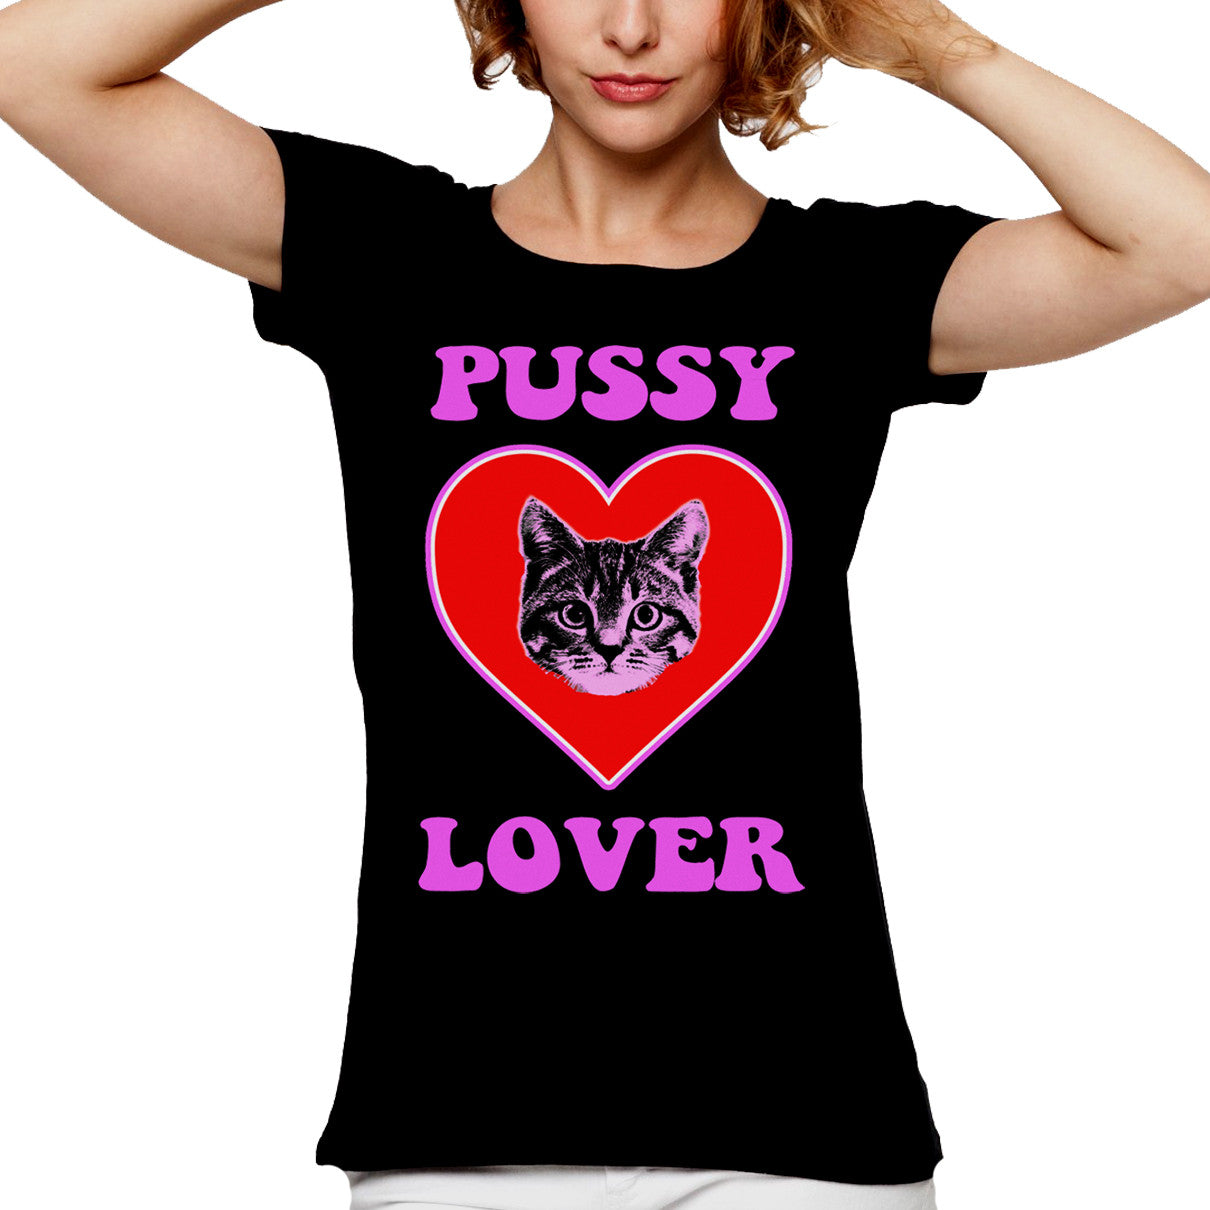 Pussy Lover T-Shirt